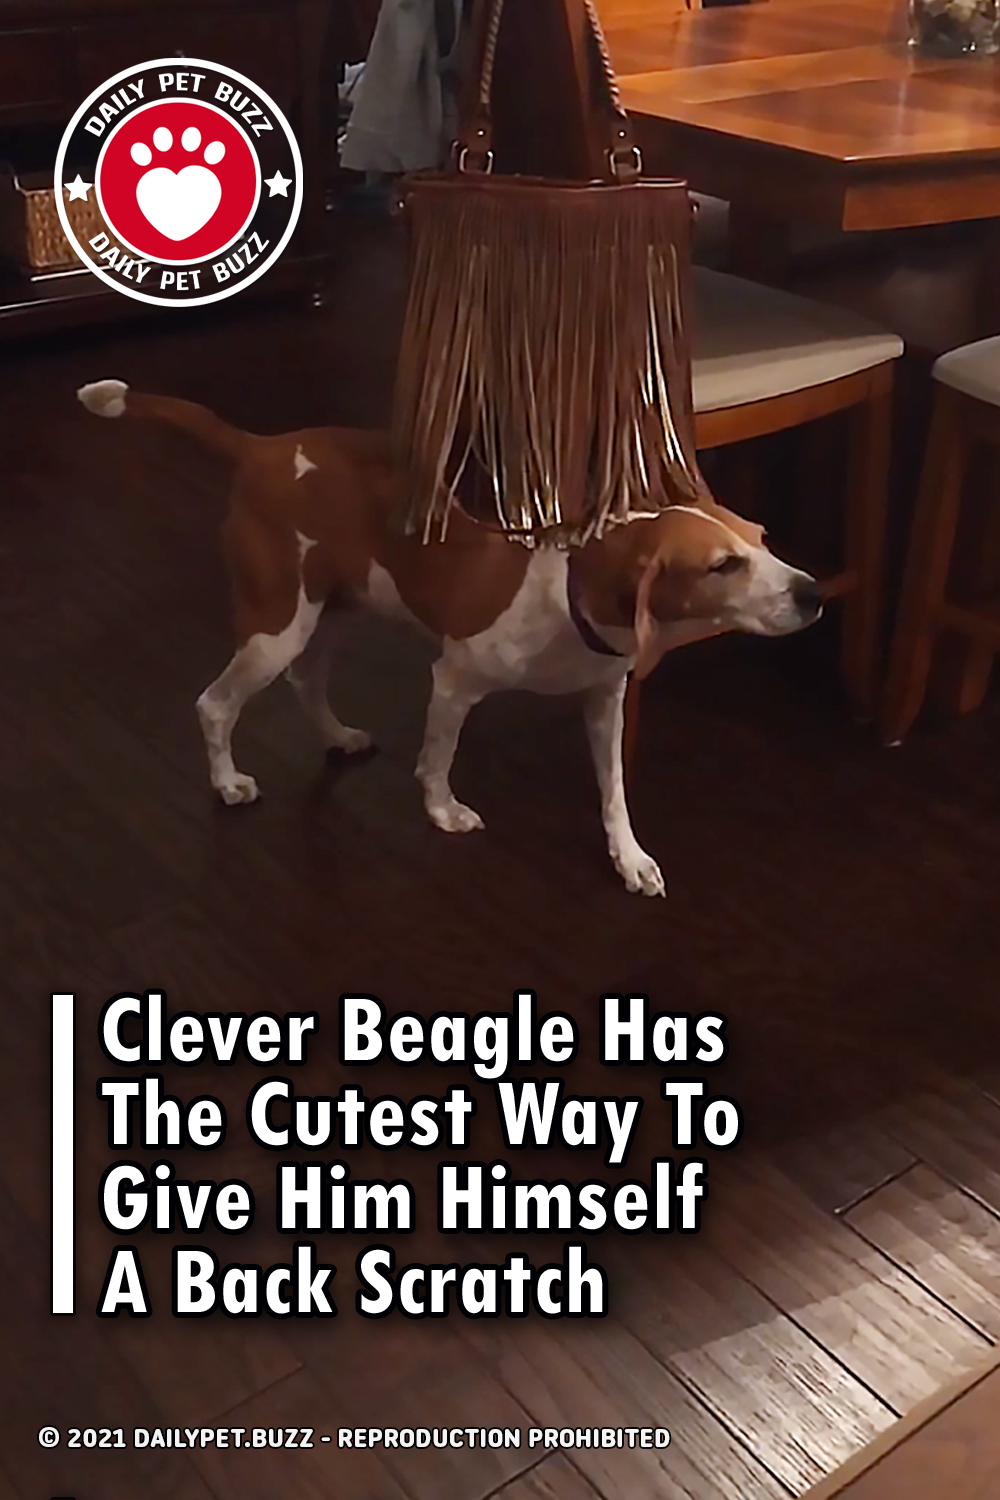 Clever Beagle Has The Cutest Way To Give Him Himself A Back Scratch